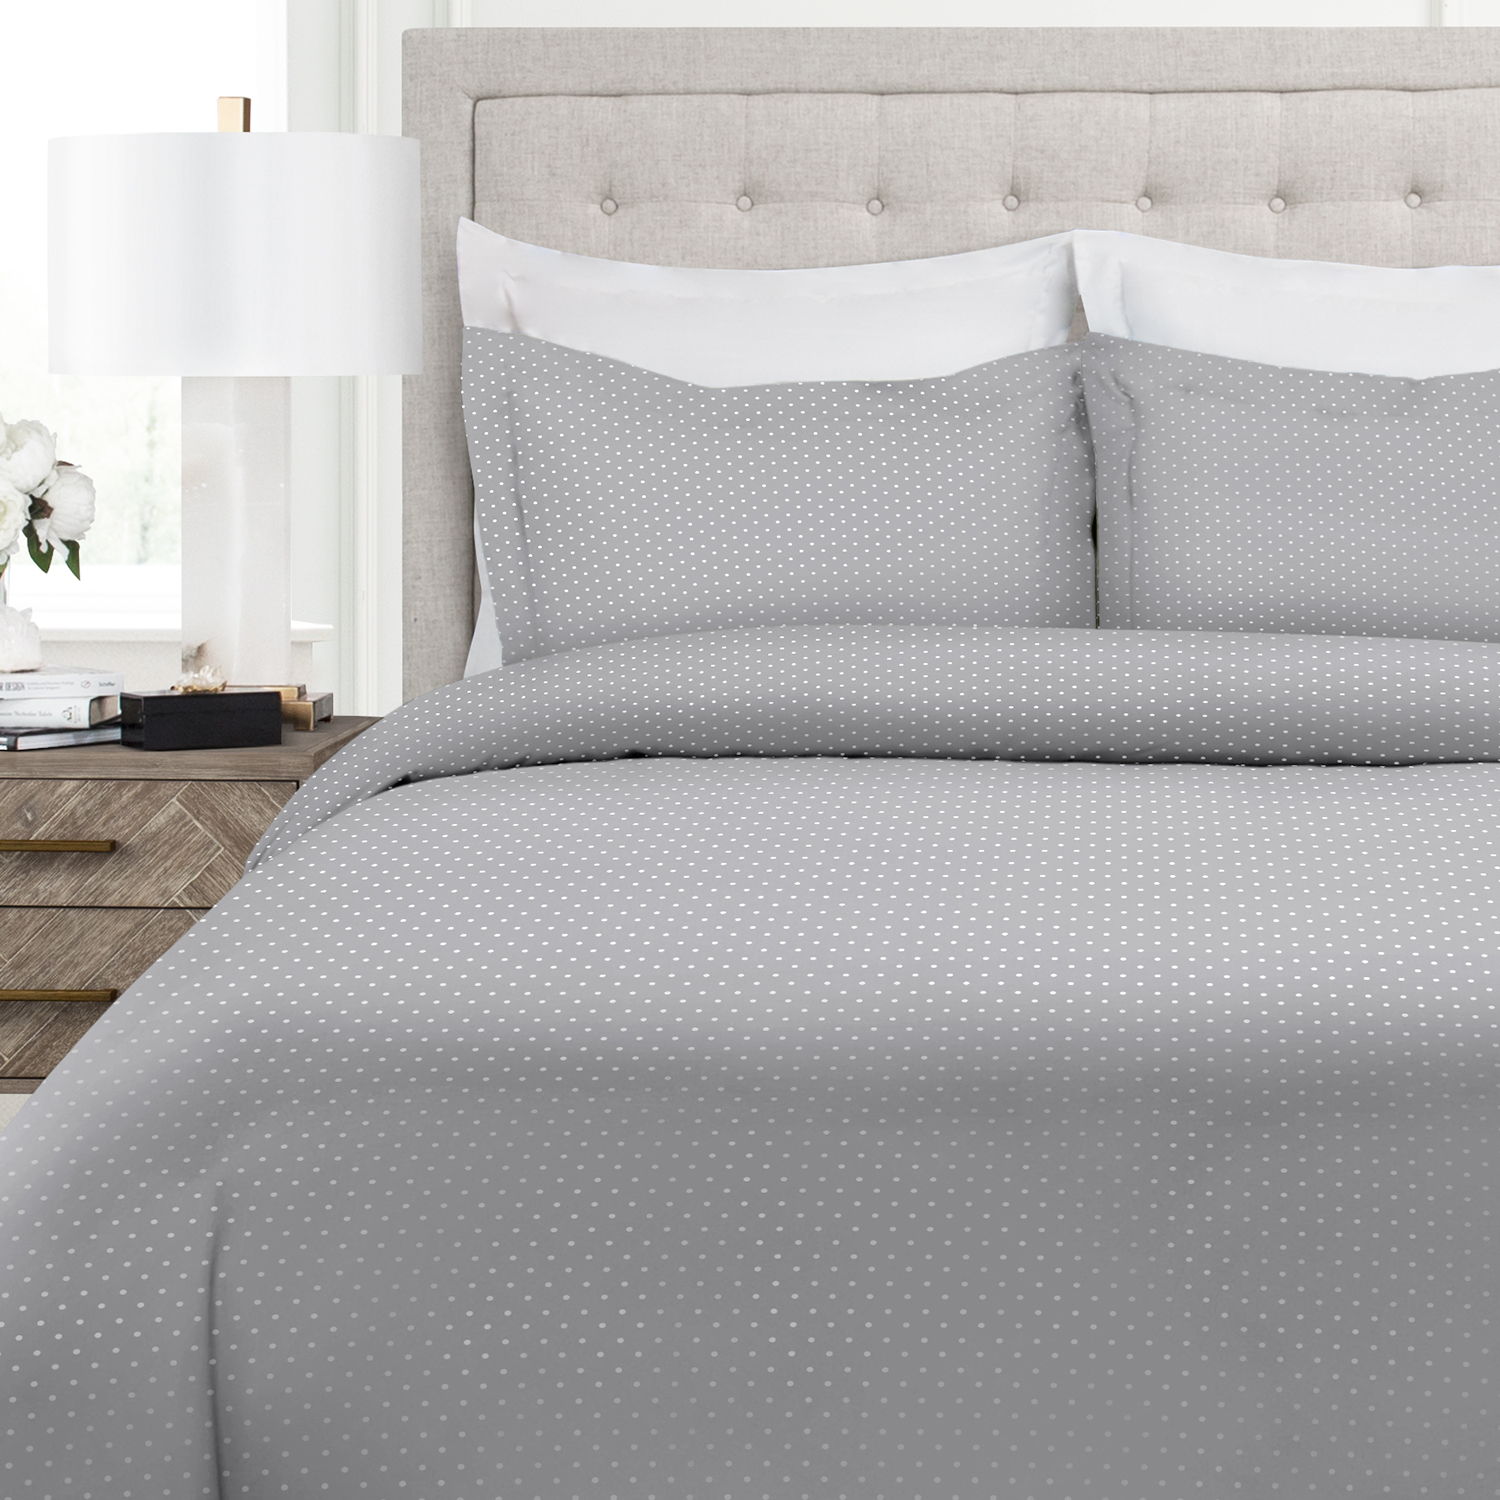 Italian Collection 3 Piece Duvet Cover Set with Pindot Pattern by ienjoy Home